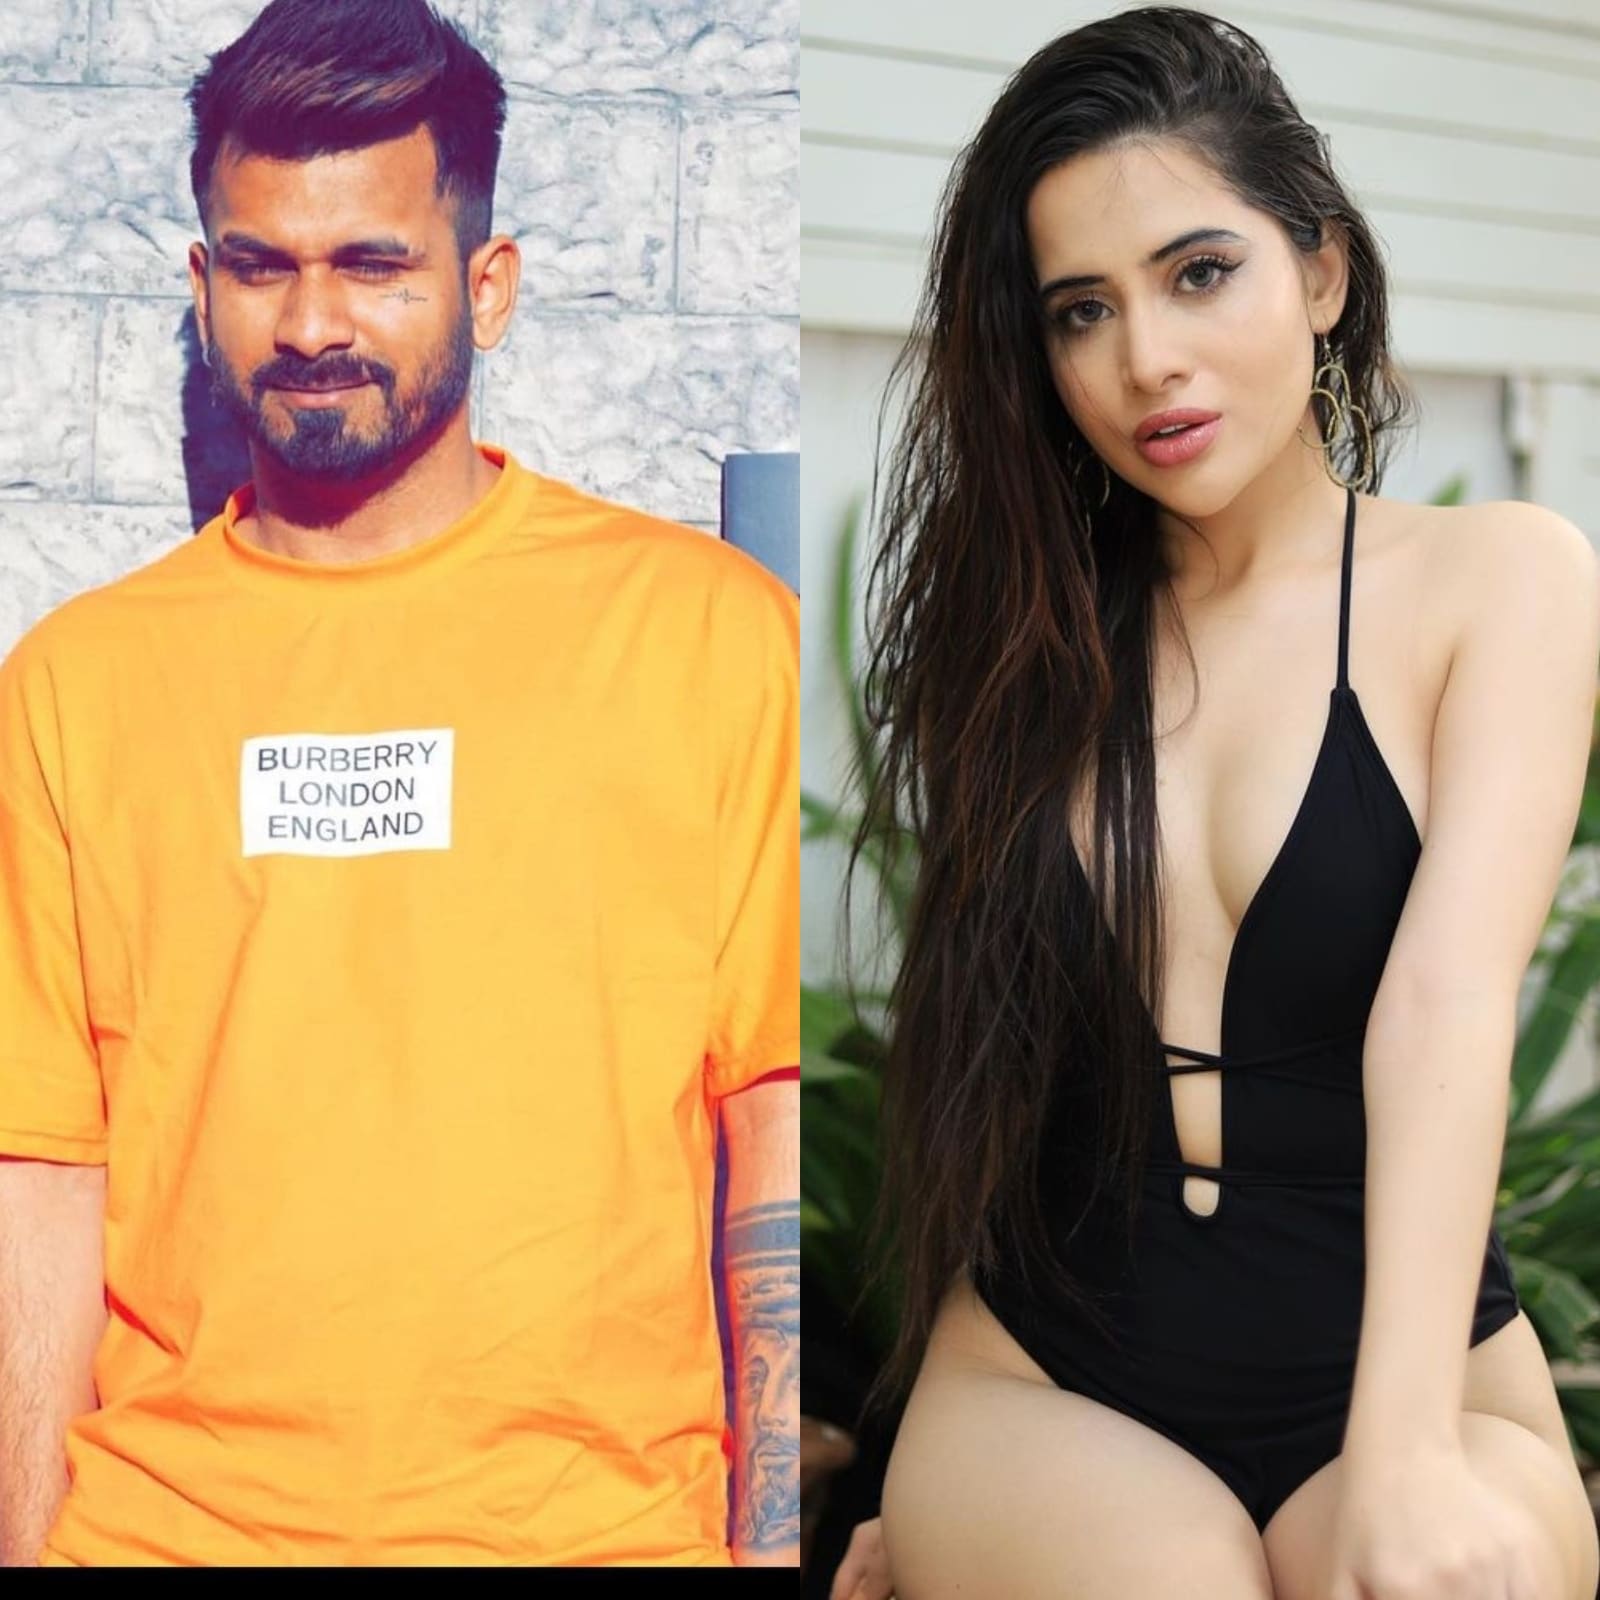 Hindi Blackmail Chudai Video - Urfi Javed Accuses Man of Threatening Her to 'Have Video Sex' With Him: 'He  Was Blackmailing Me' - News18